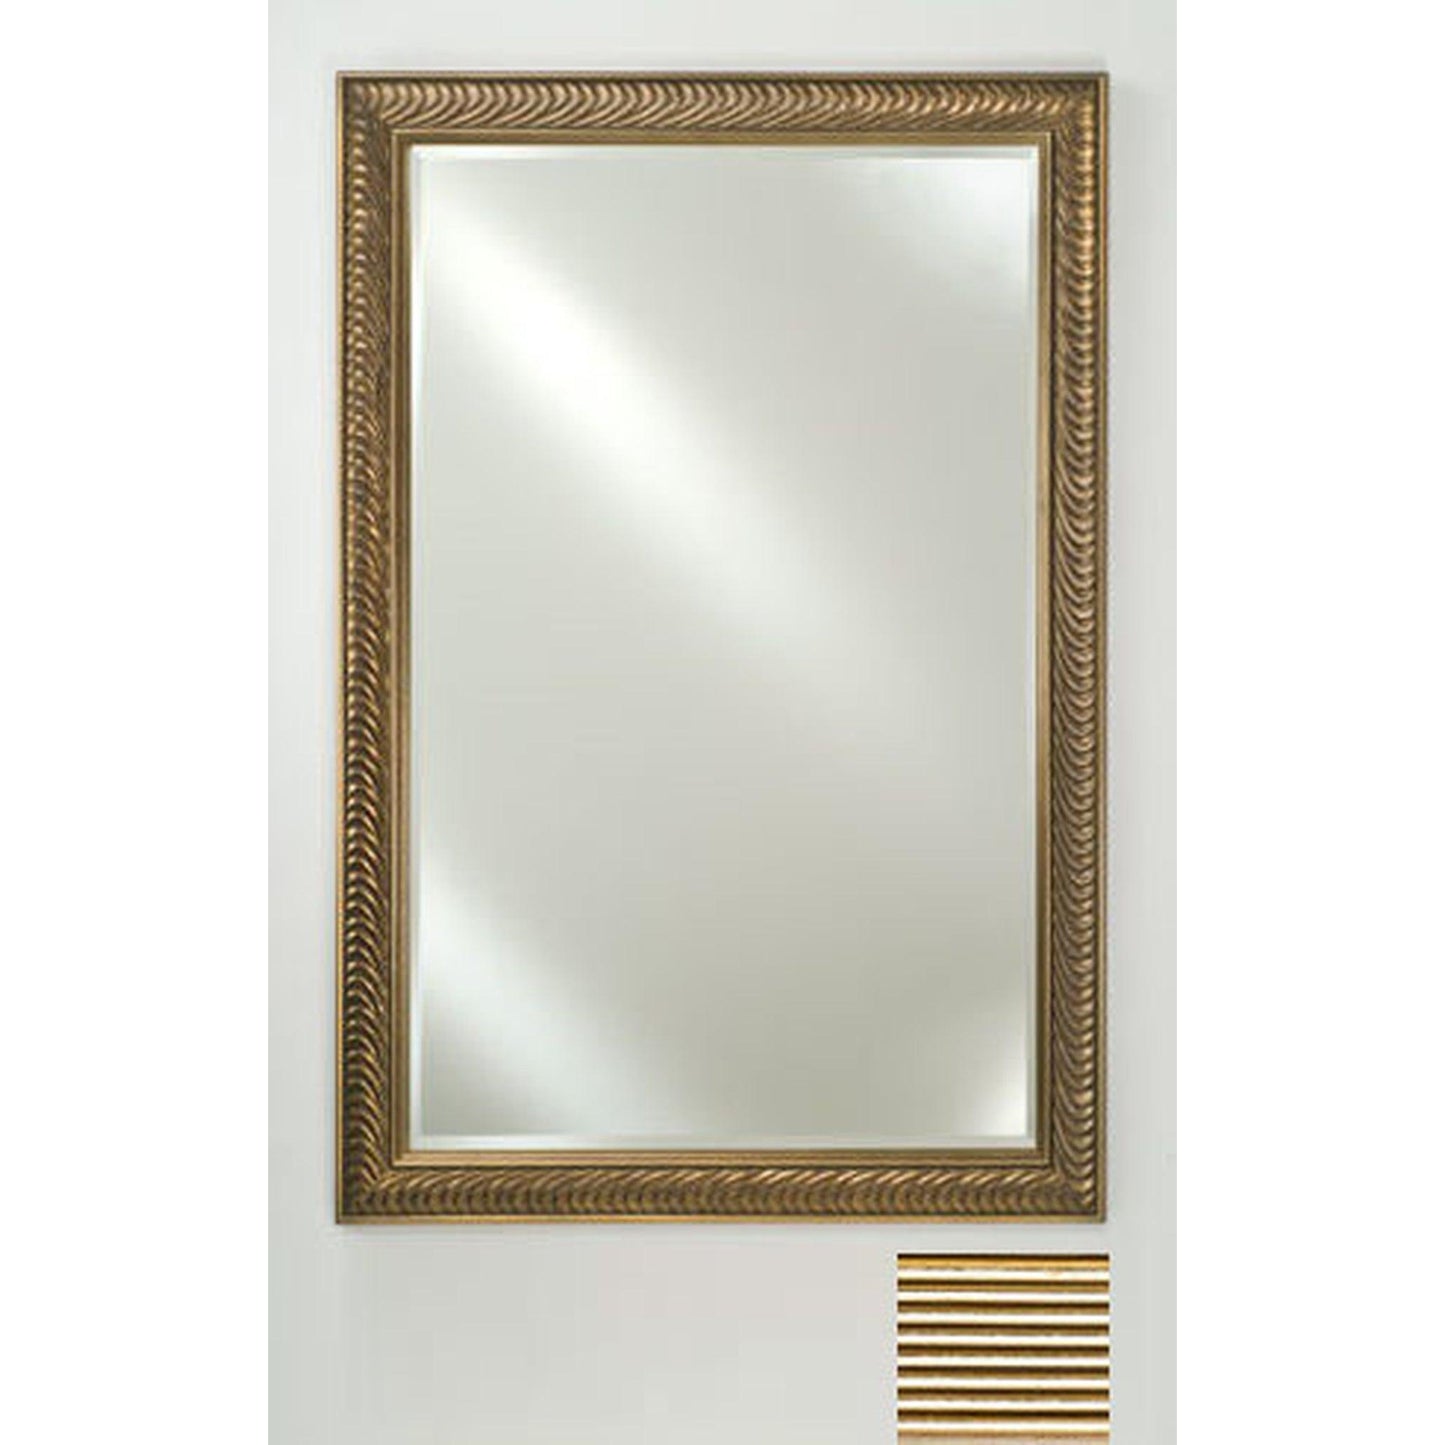 Afina Signature 20" x 26" Meridian Antique Silver With Antique Gold Caps Framed Mirror With Beveled Edge